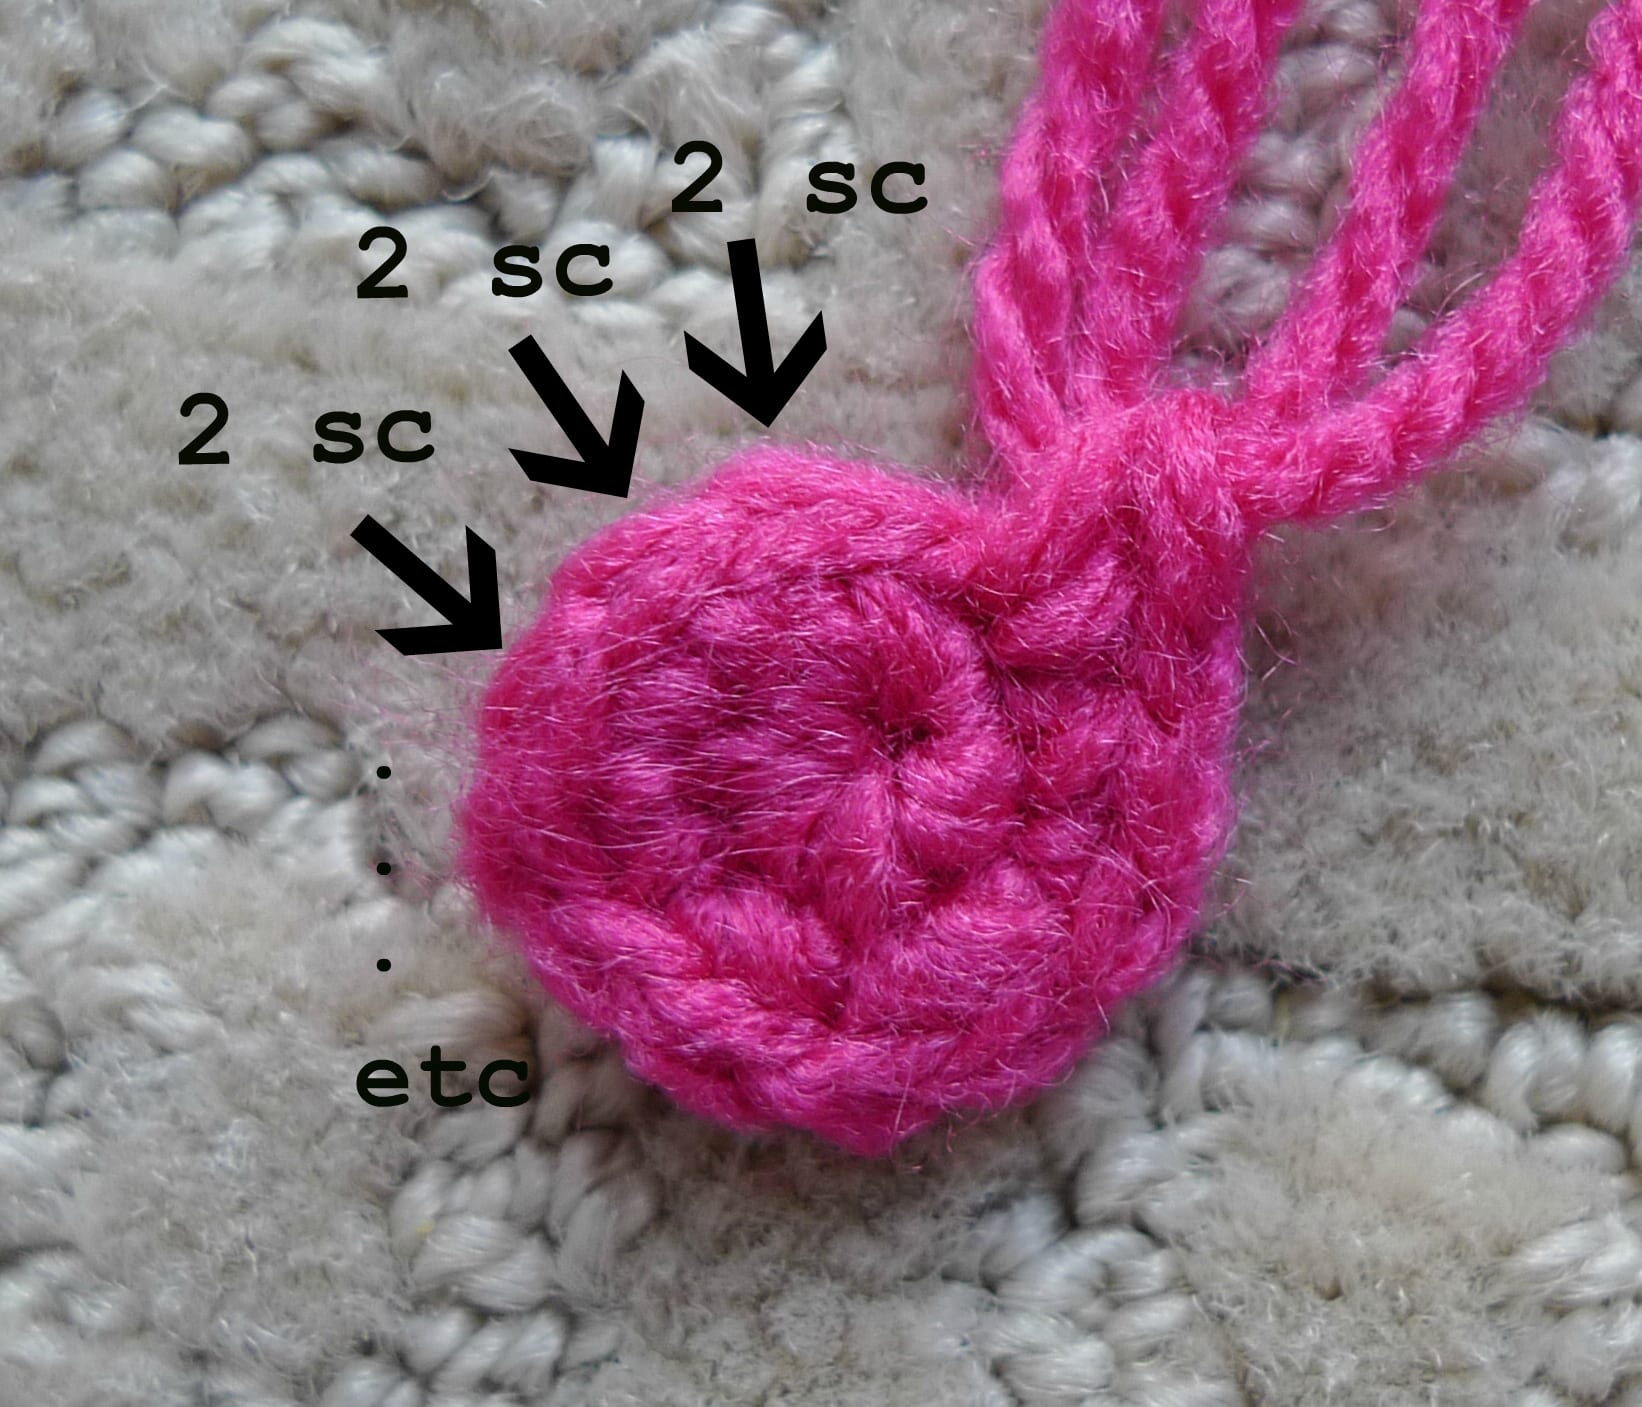 How to Understand and Read Crochet Chart Symbols - Easy Crochet Patterns